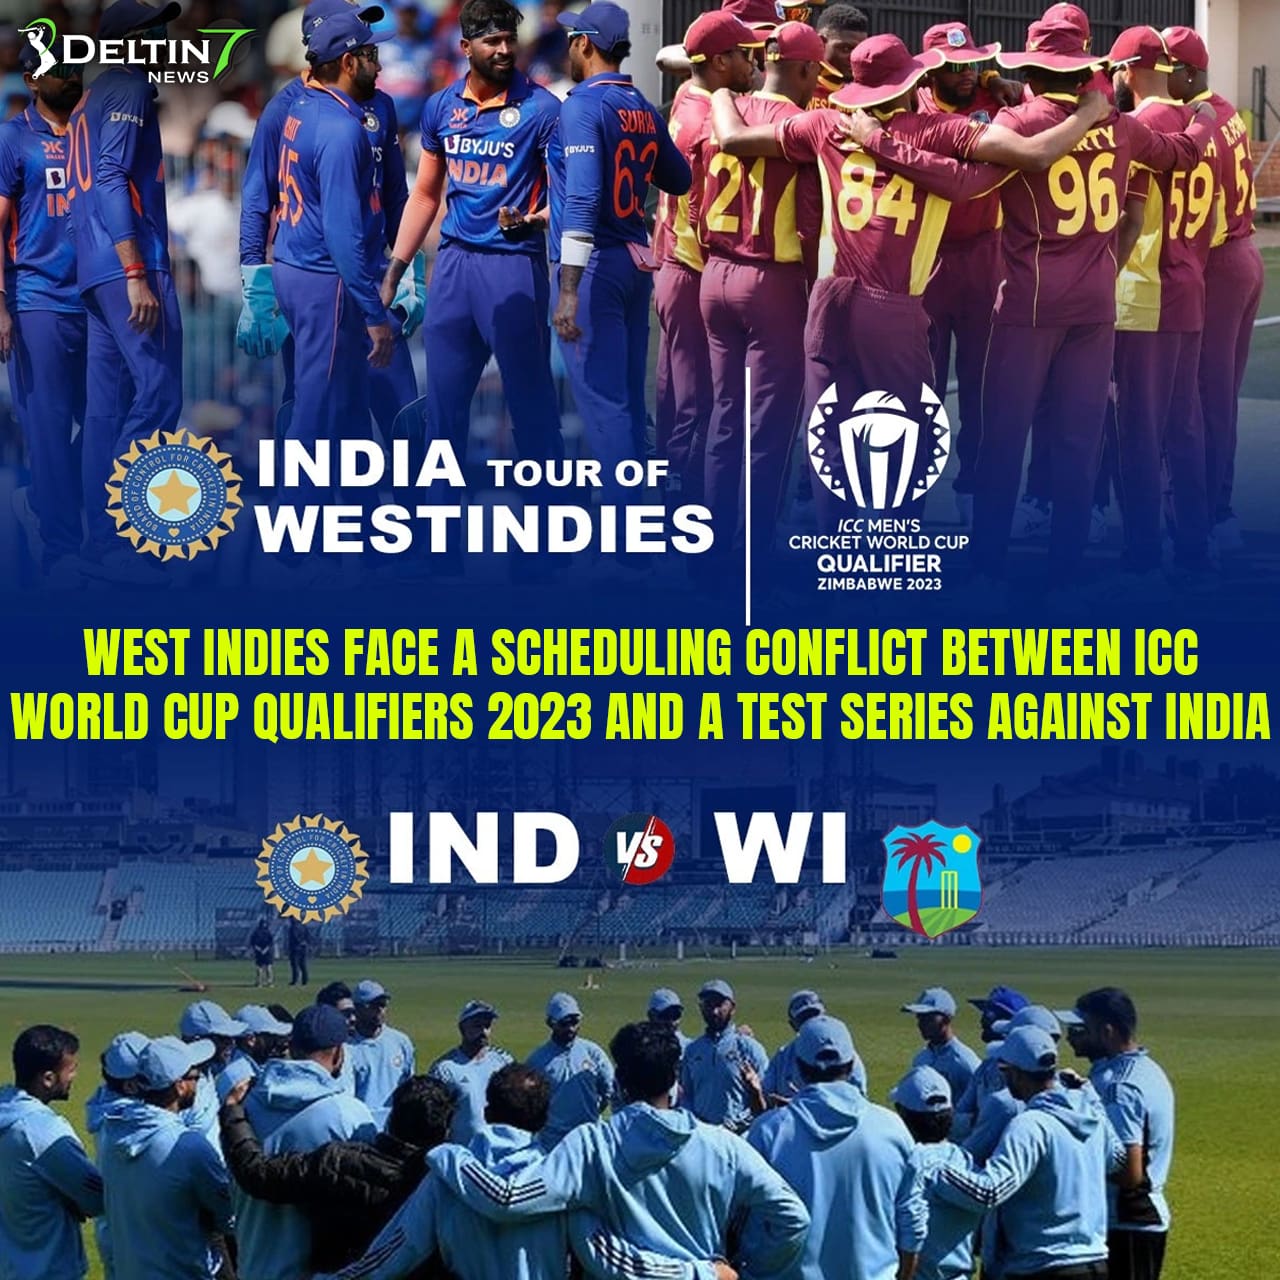 West Indies face a scheduling conflict between ICC World Cup qualifiers 2023 and a Test series against India (India vs West Indies)